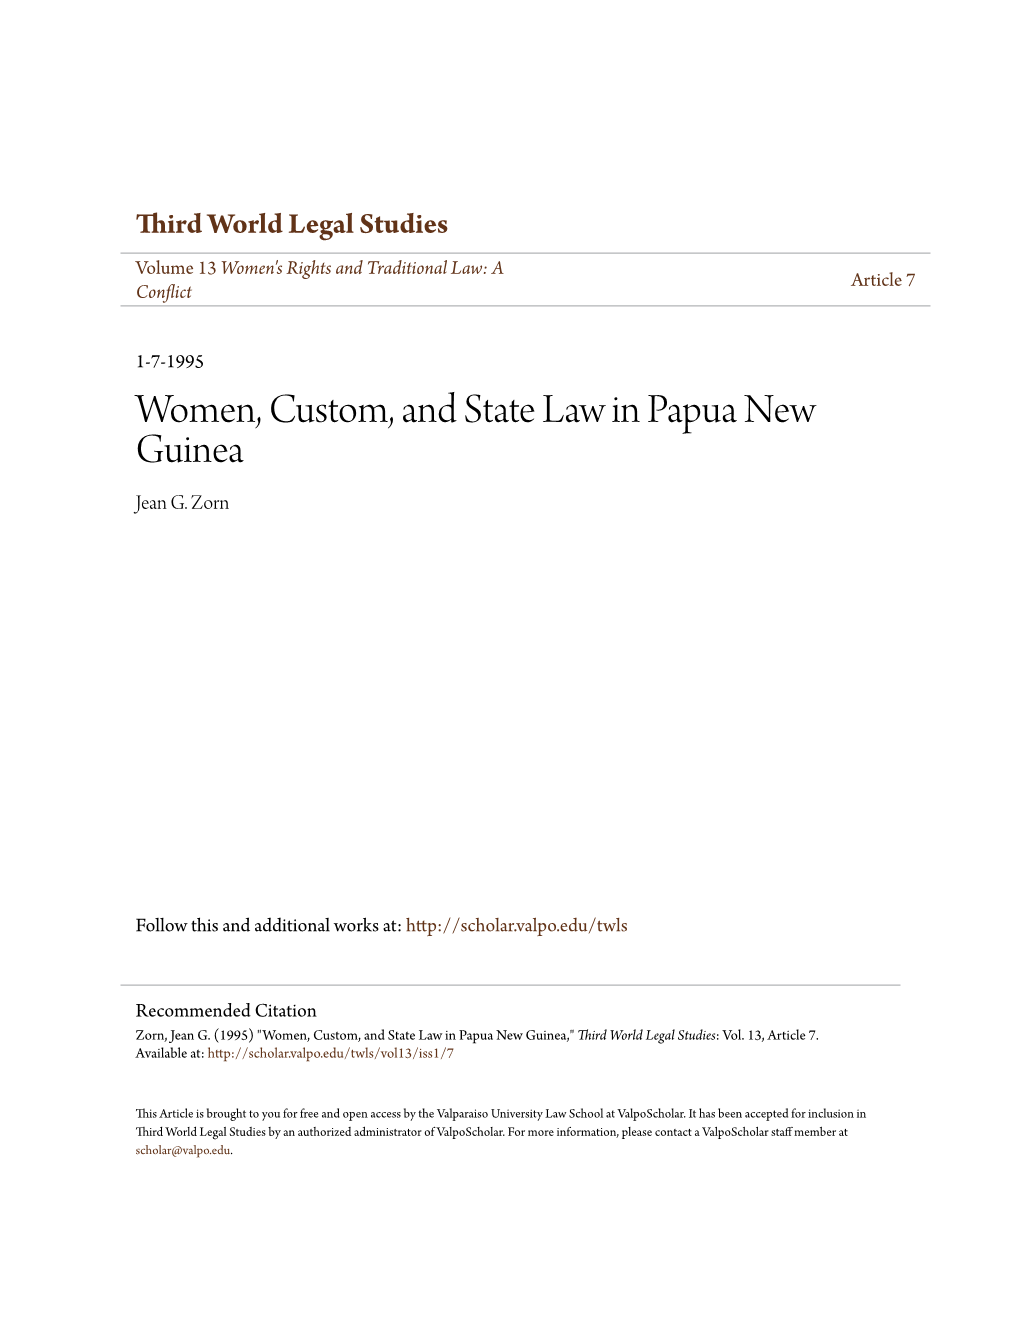 Women, Custom, and State Law in Papua New Guinea Jean G